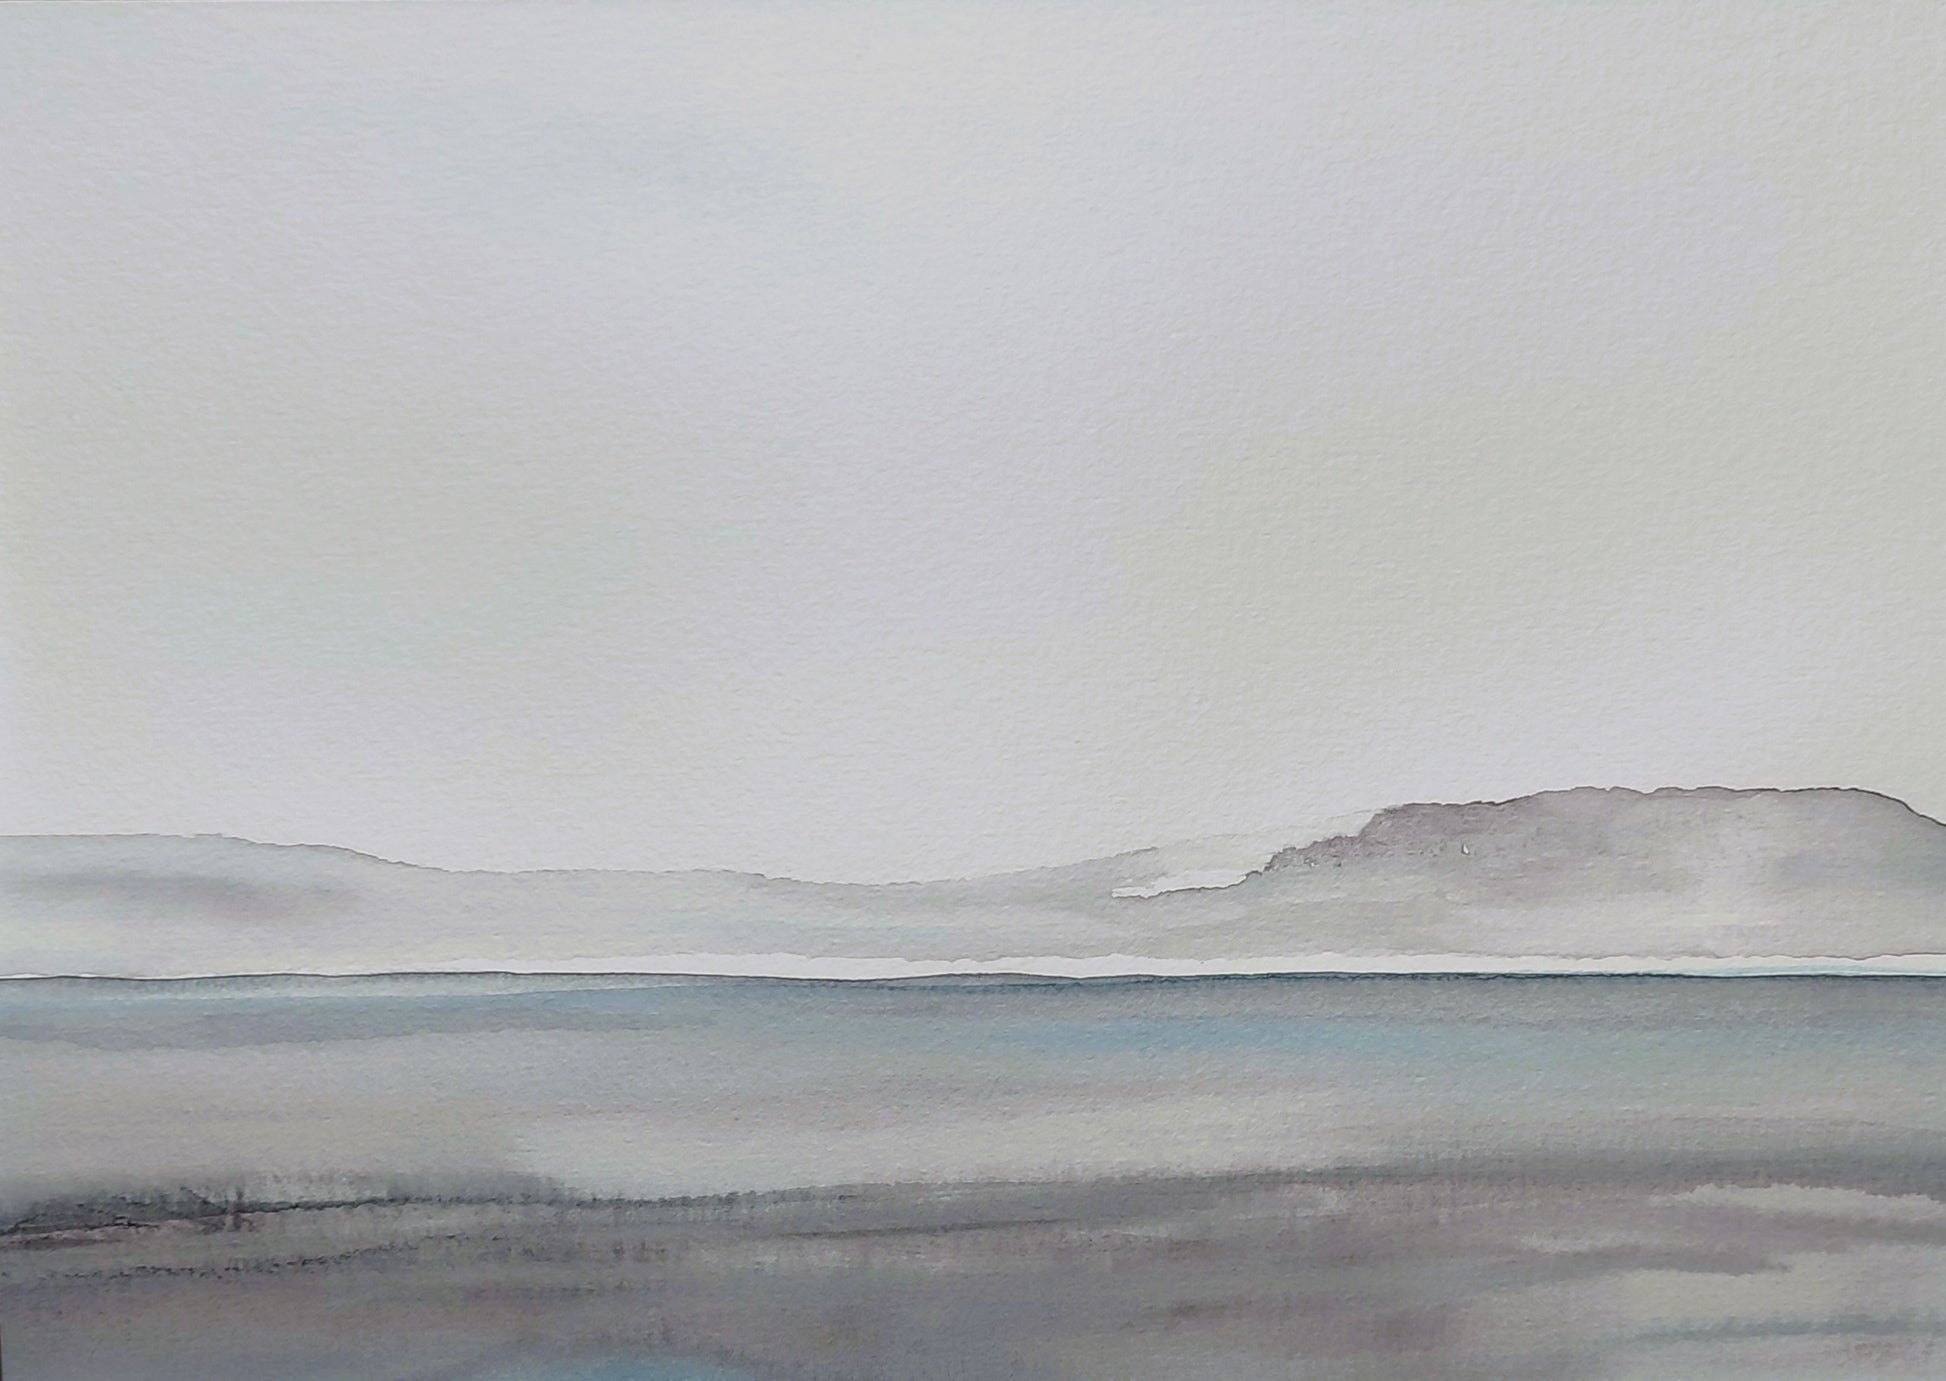 Image of a calm lake with simple foreground detail and distant fell, in a palette of greys with a soft blue